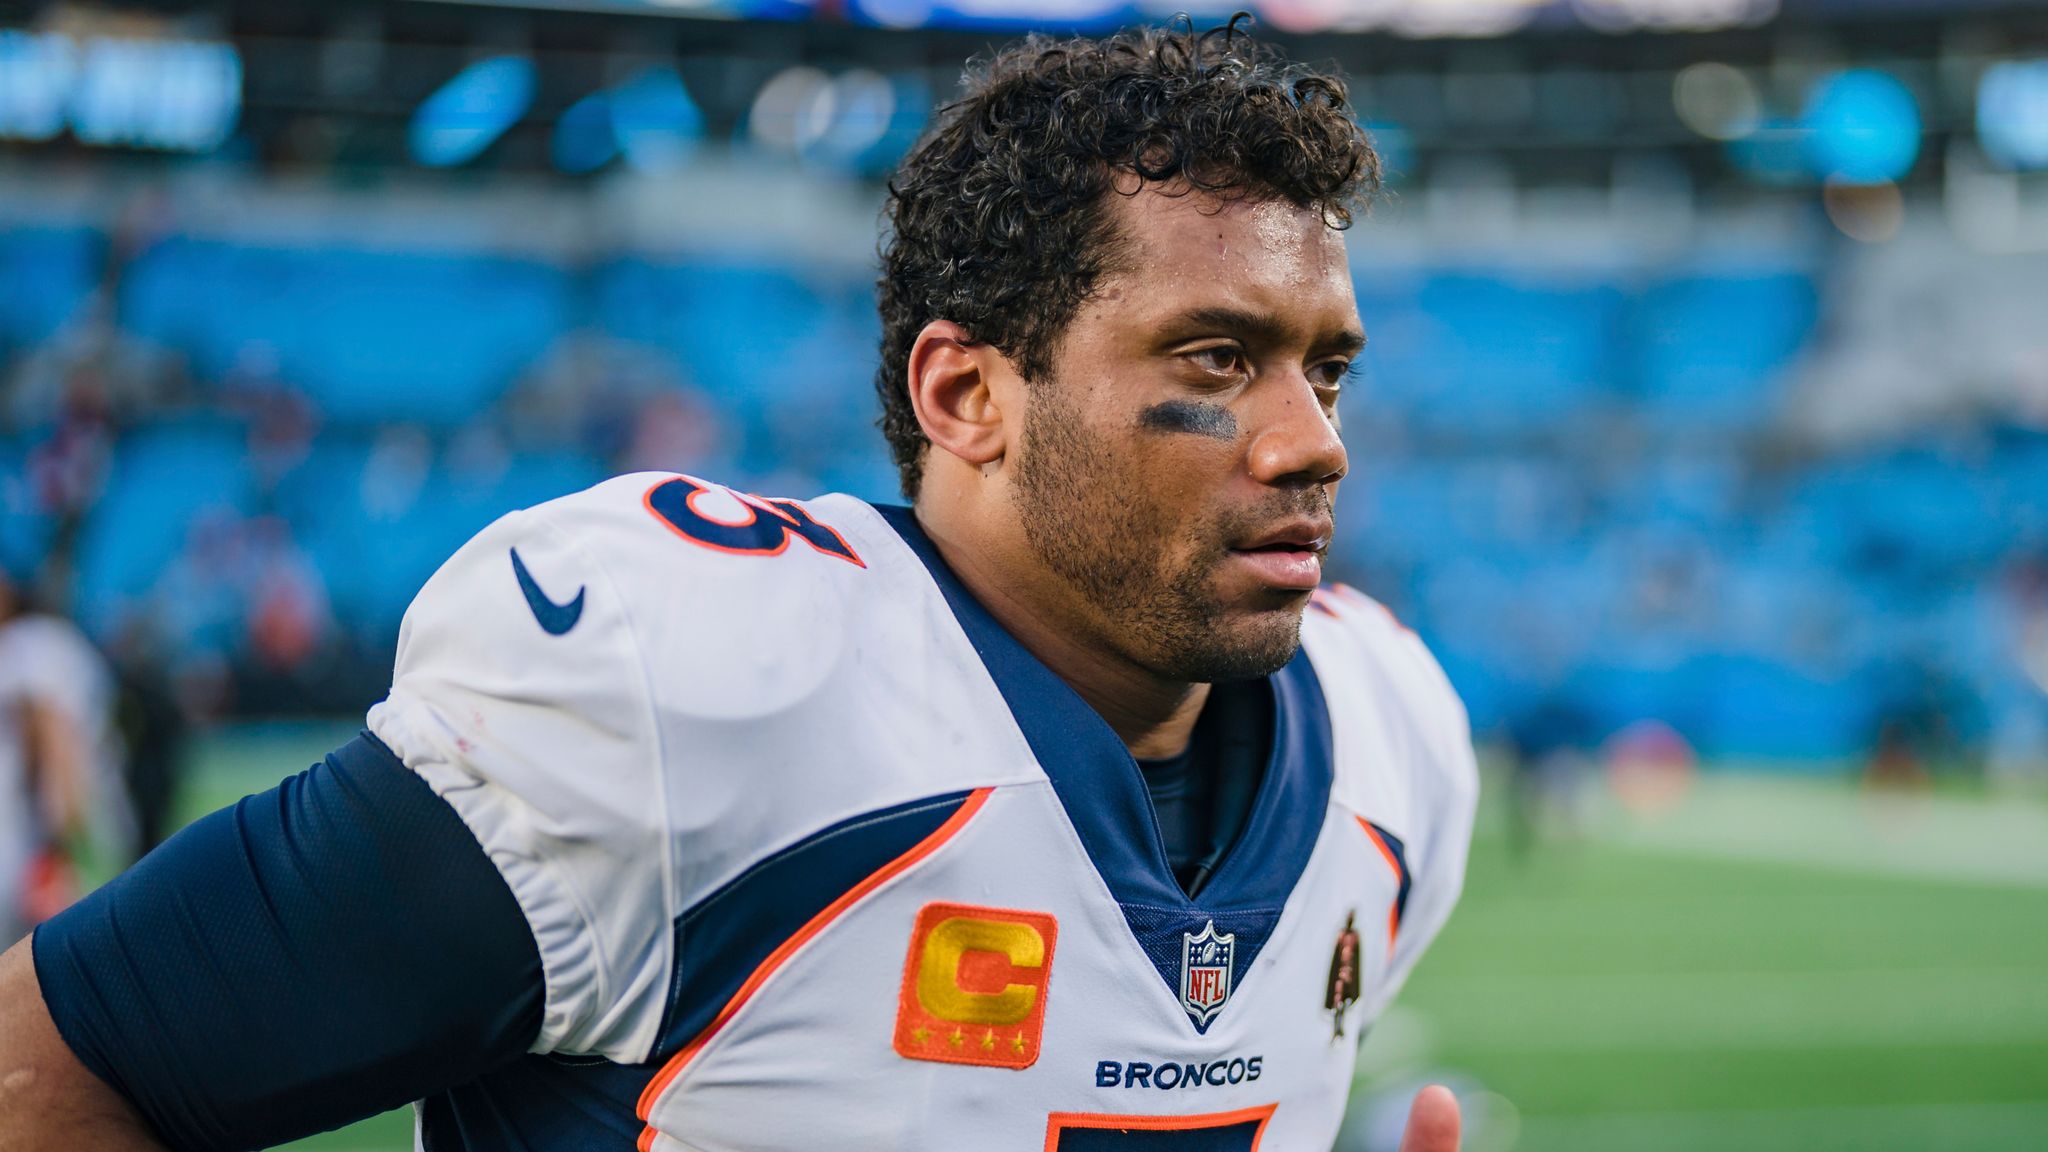 NFL News: Russell Wilson’s Turbulent Season, A Closer Look at His Struggles with the Denver Broncos